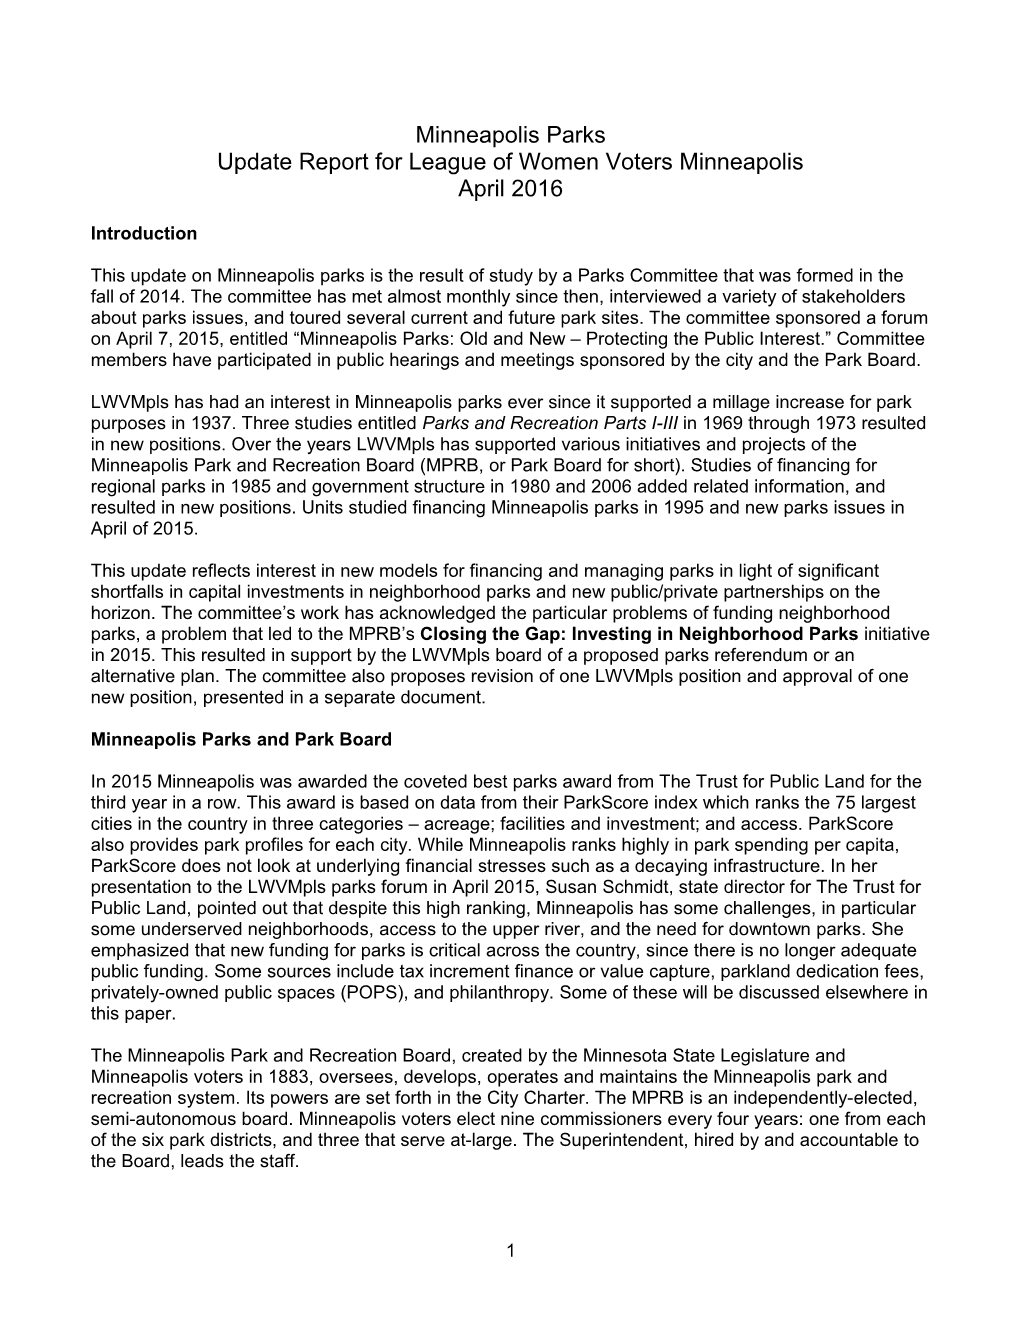 Update Report for League of Women Voters Minneapolis